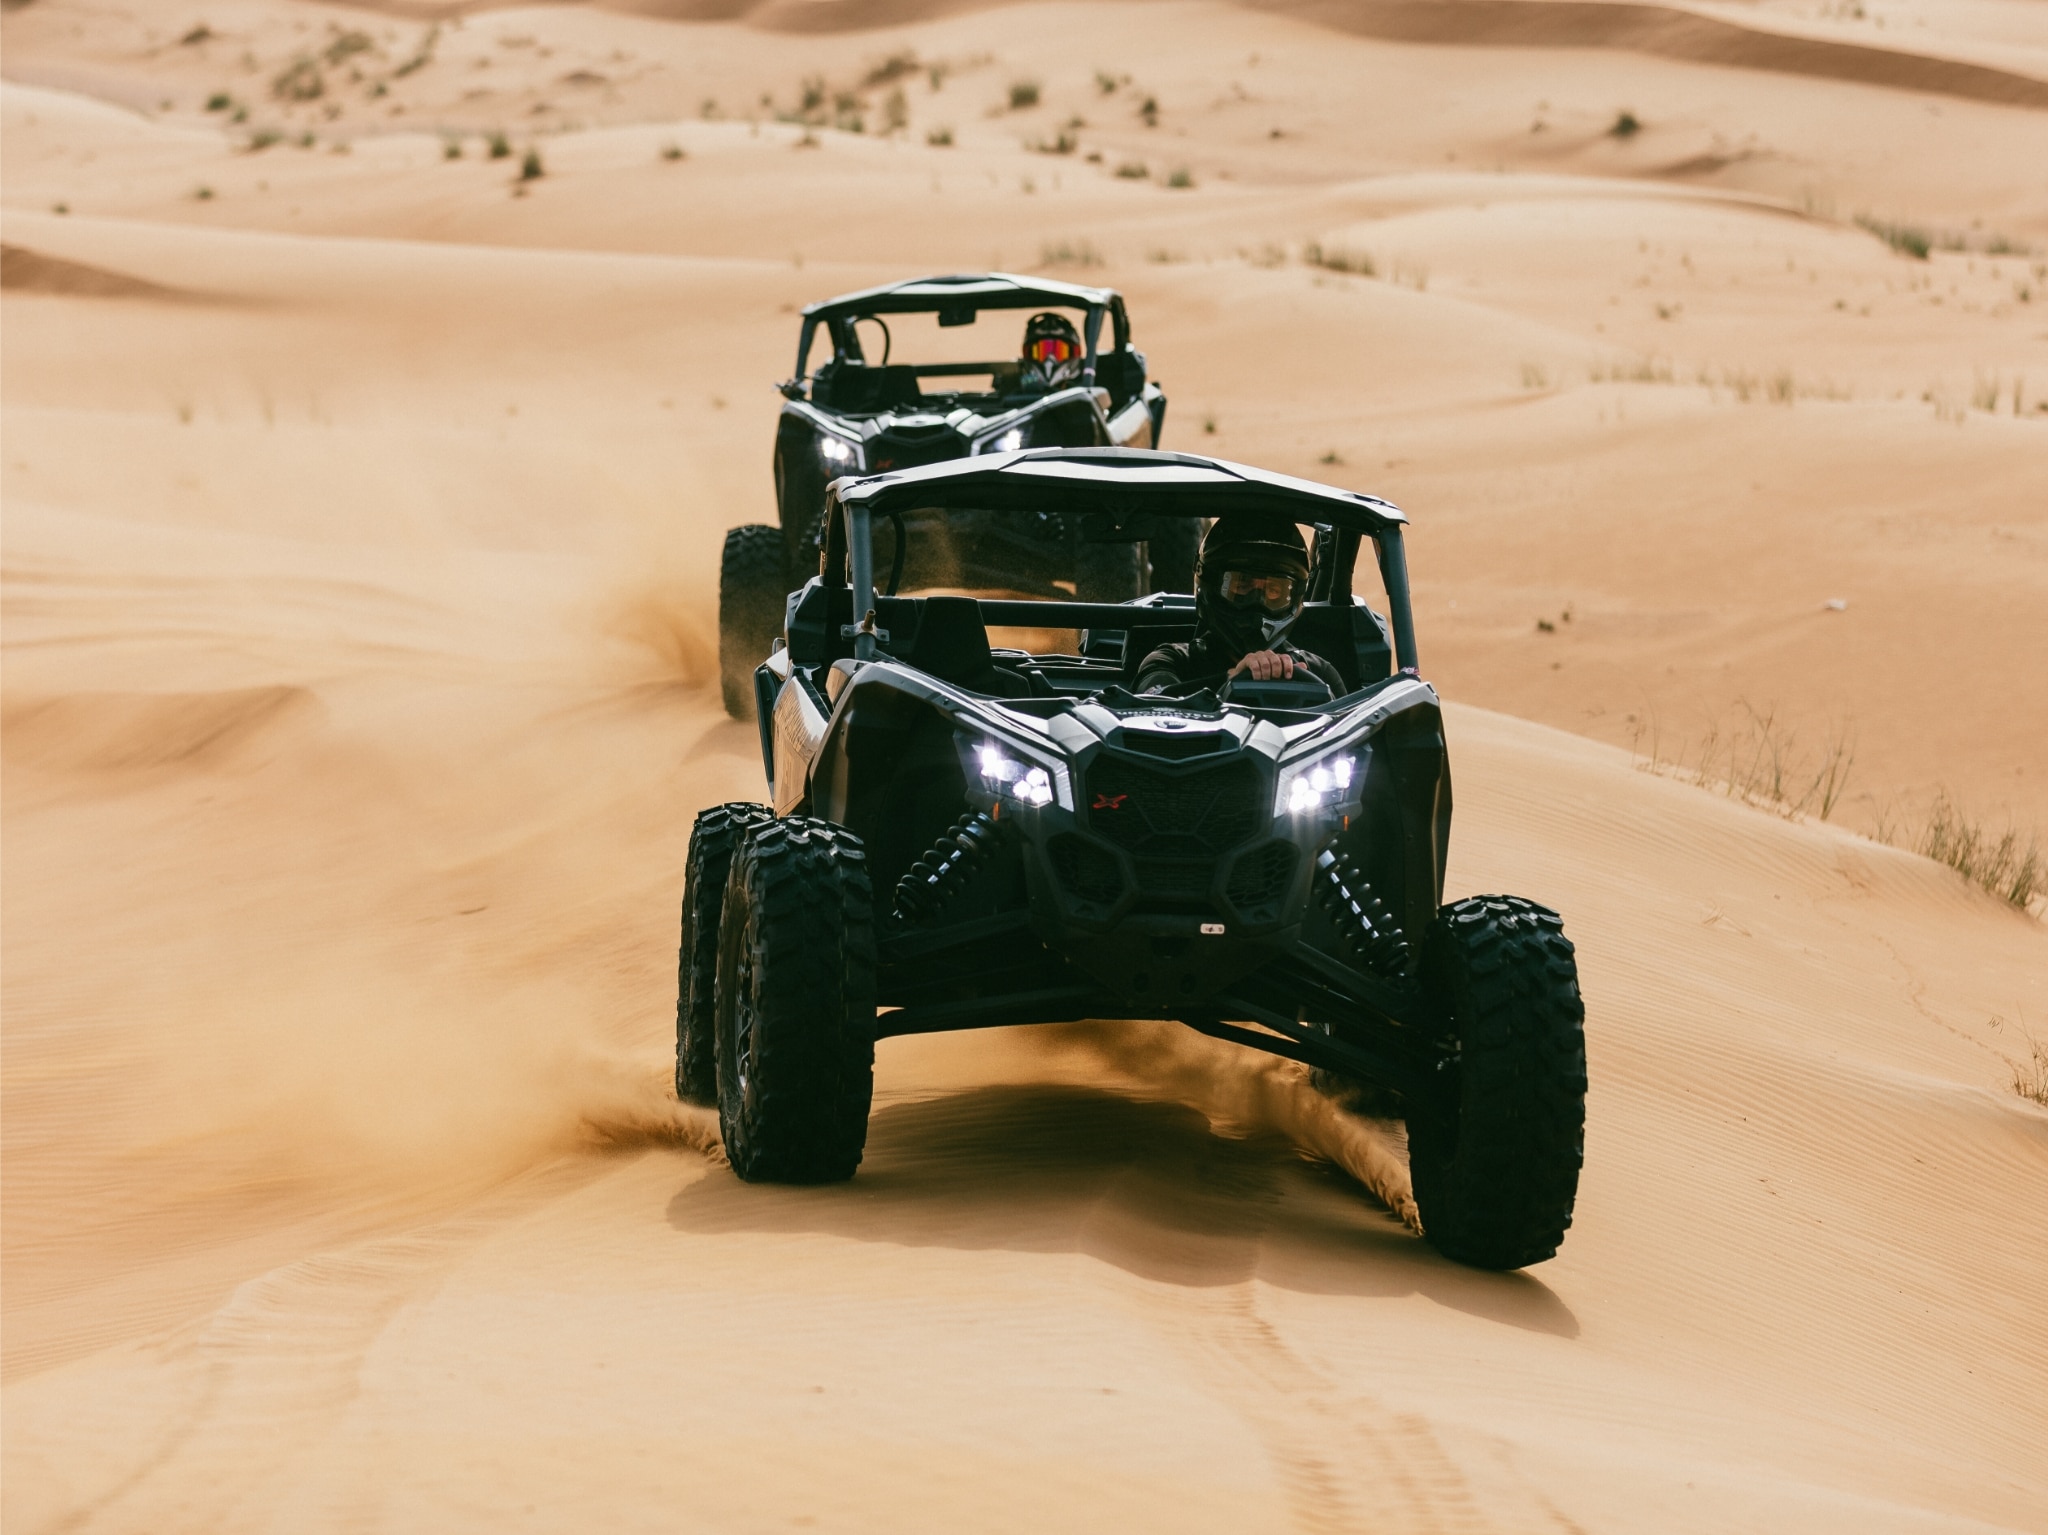 One hour of full-on SxS thrills zooming on the sand dunes of Dubai, UAE